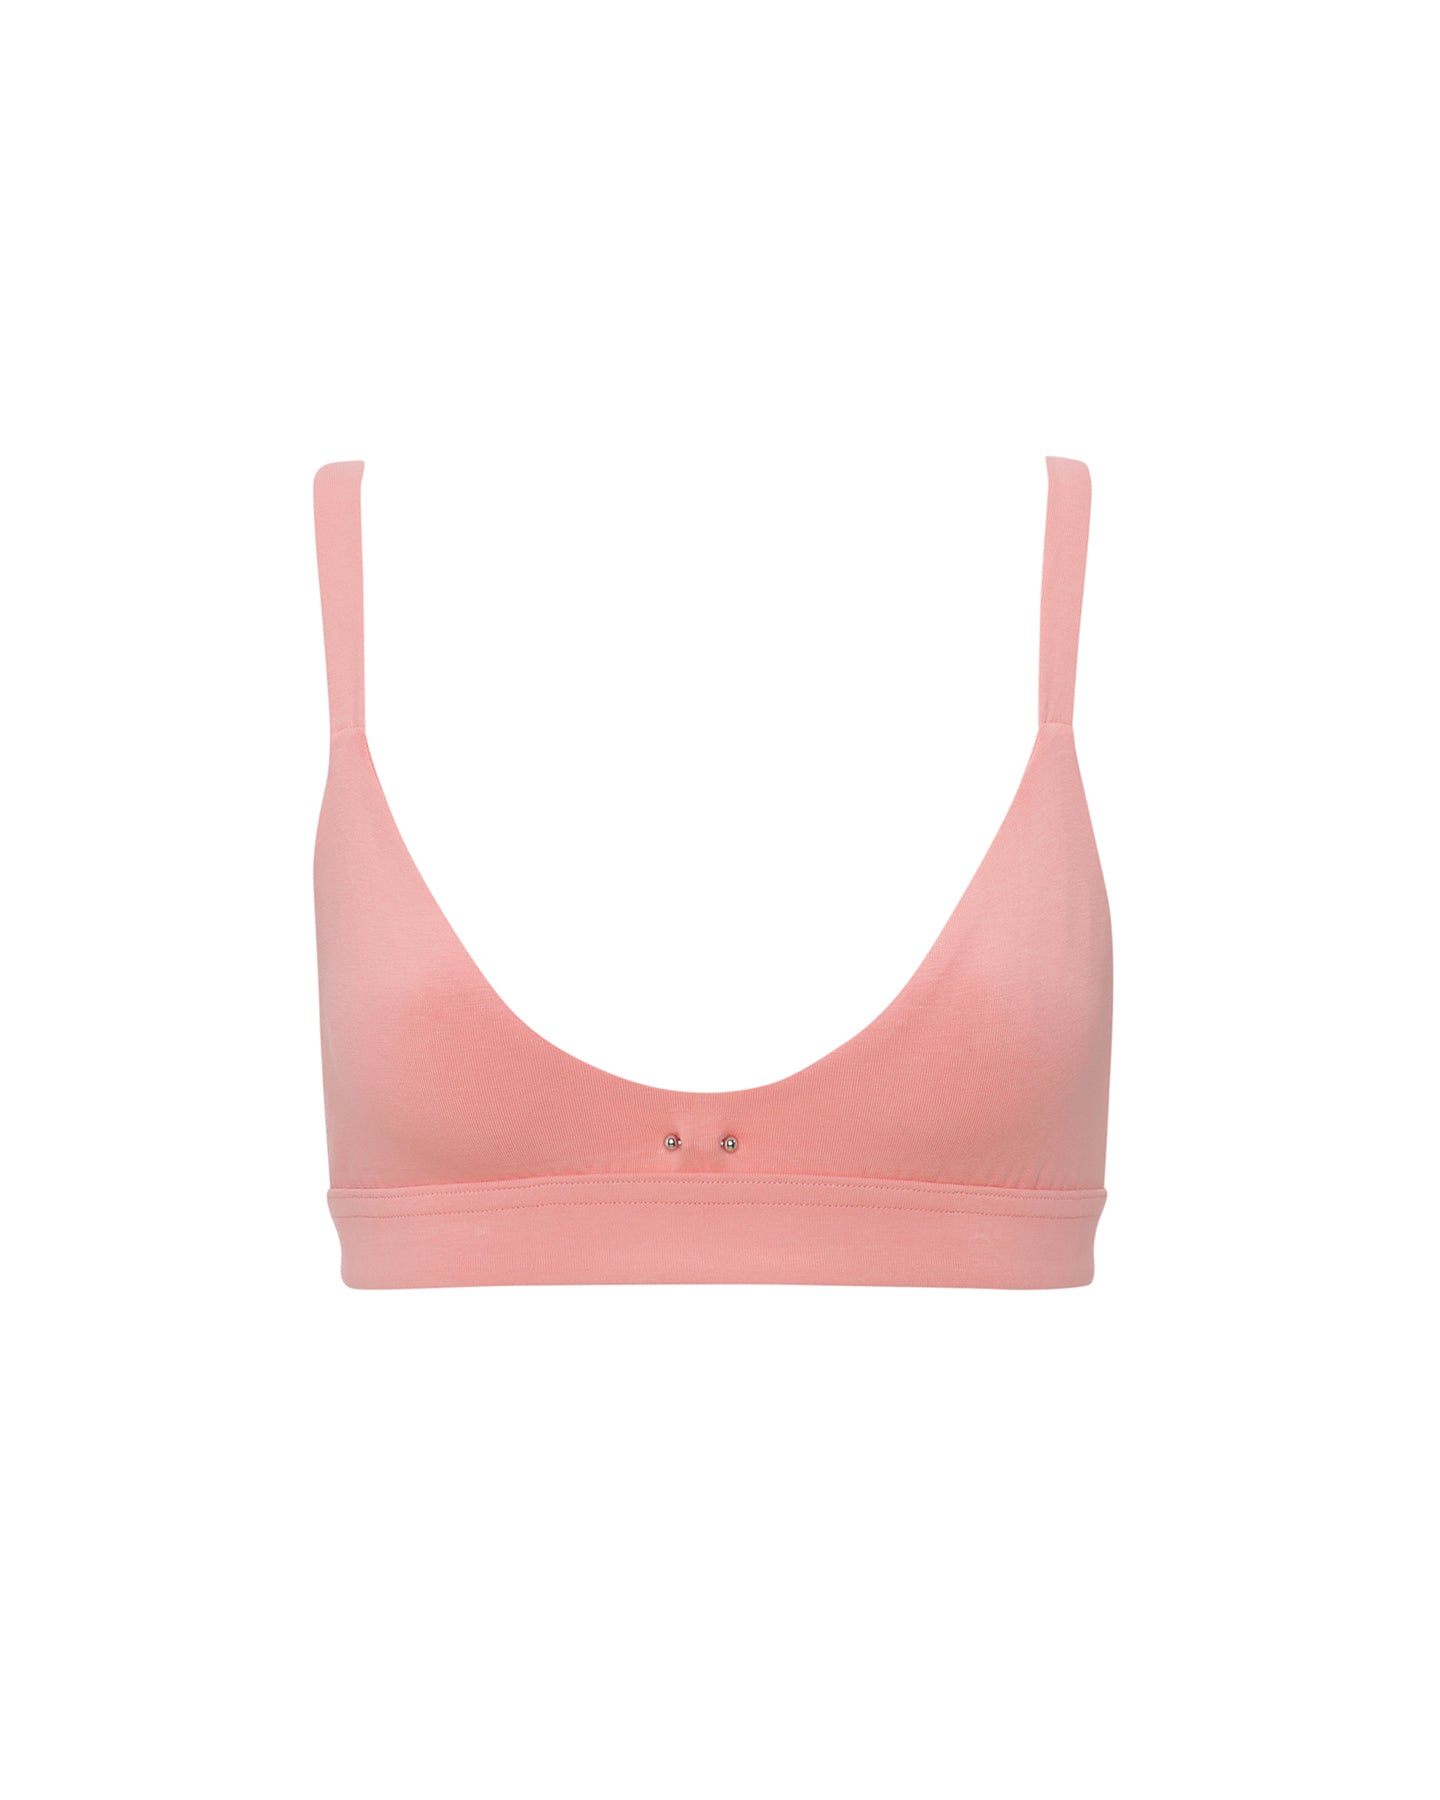 Organic pink bralettes, Made in Canada organic cotton bras